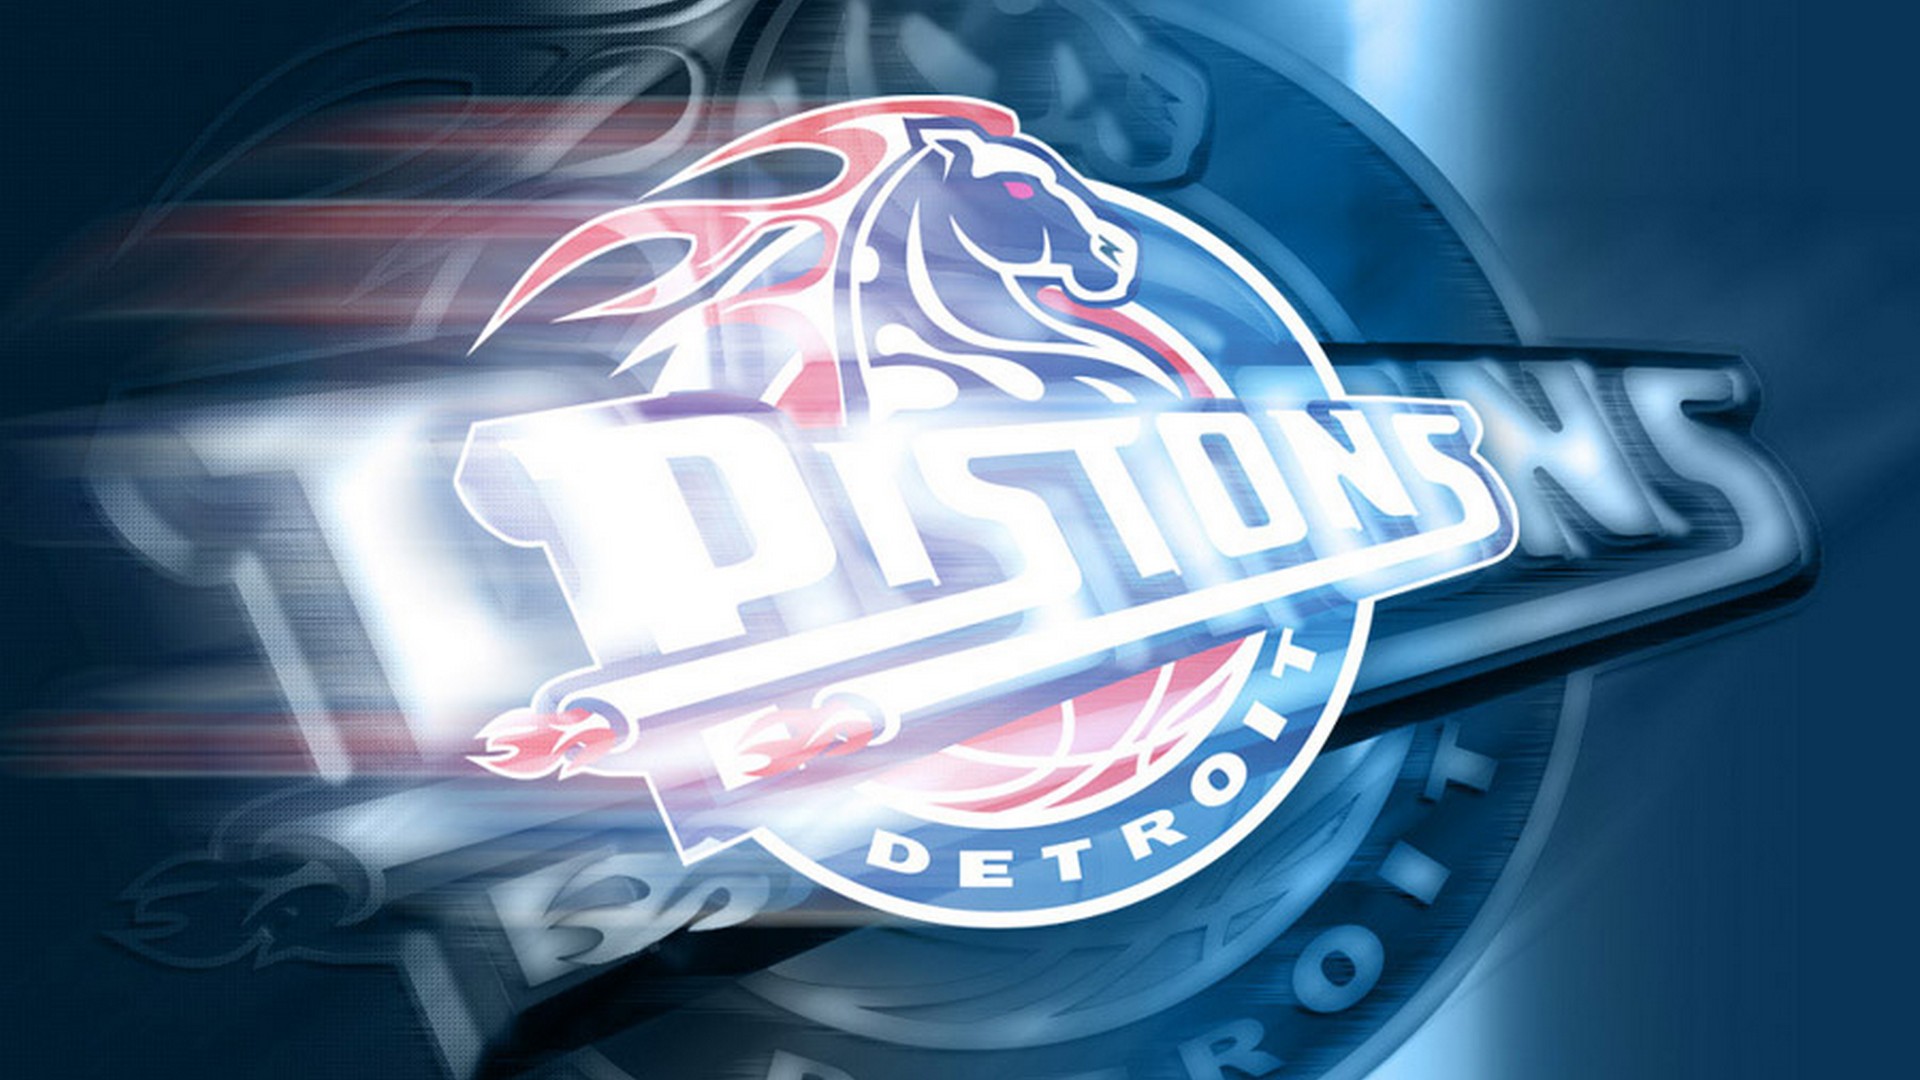 Detroit Pistons Desktop Wallpapers with high-resolution 1920x1080 pixel. You can use this wallpaper for your Desktop Computer Backgrounds, Windows or Mac Screensavers, iPhone Lock screen, Tablet or Android and another Mobile Phone device